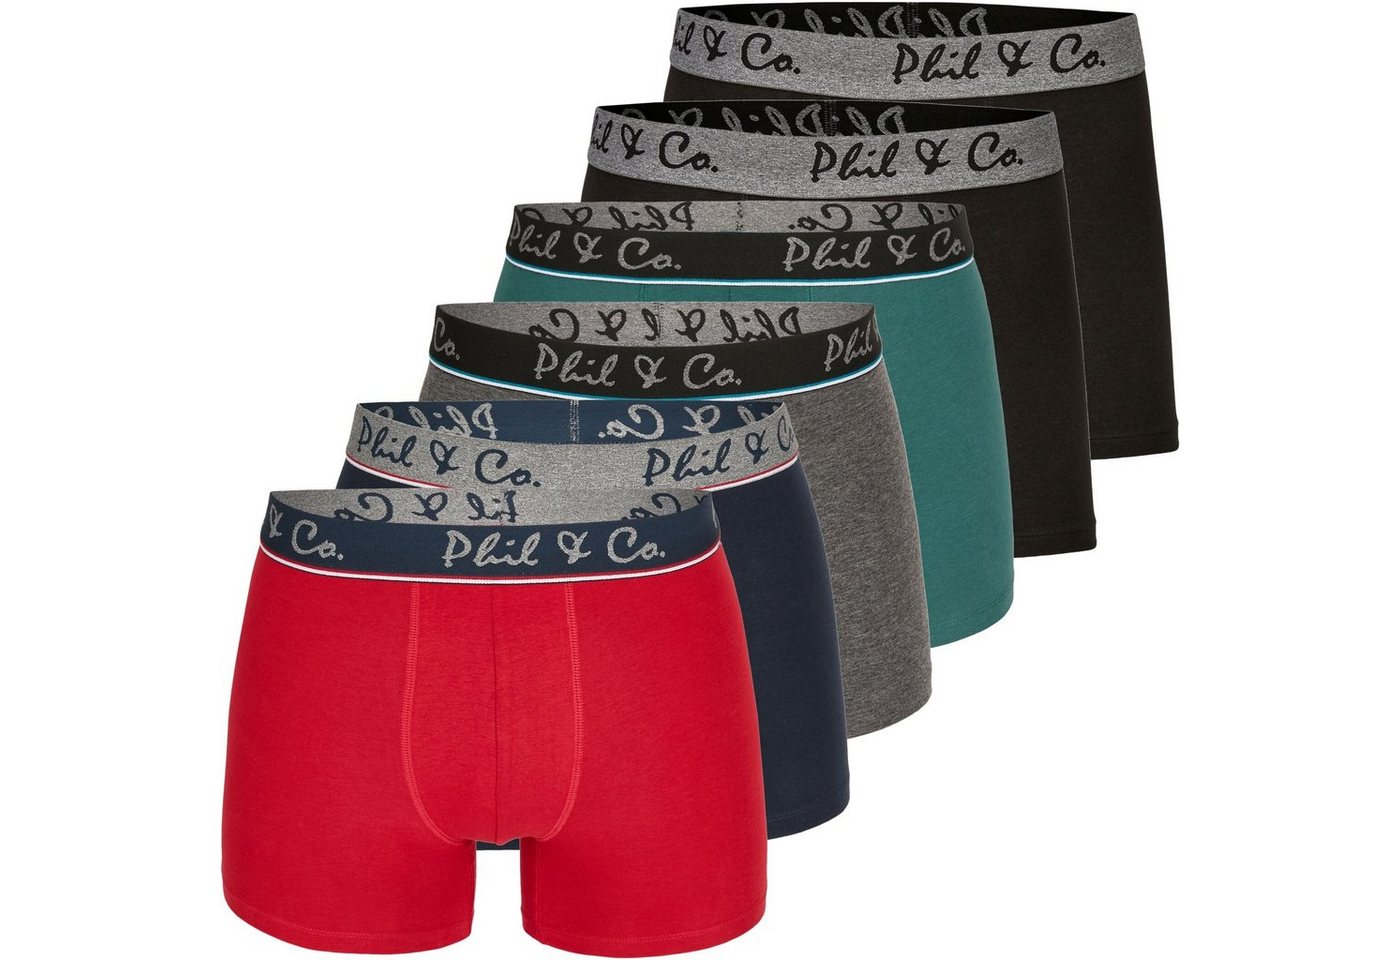 Phil & Co. Boxershorts 6er Pack Phil & Co Berlin Jersey Boxershorts Trunk Short Pant FARBWAHL (1-St) von Phil & Co.